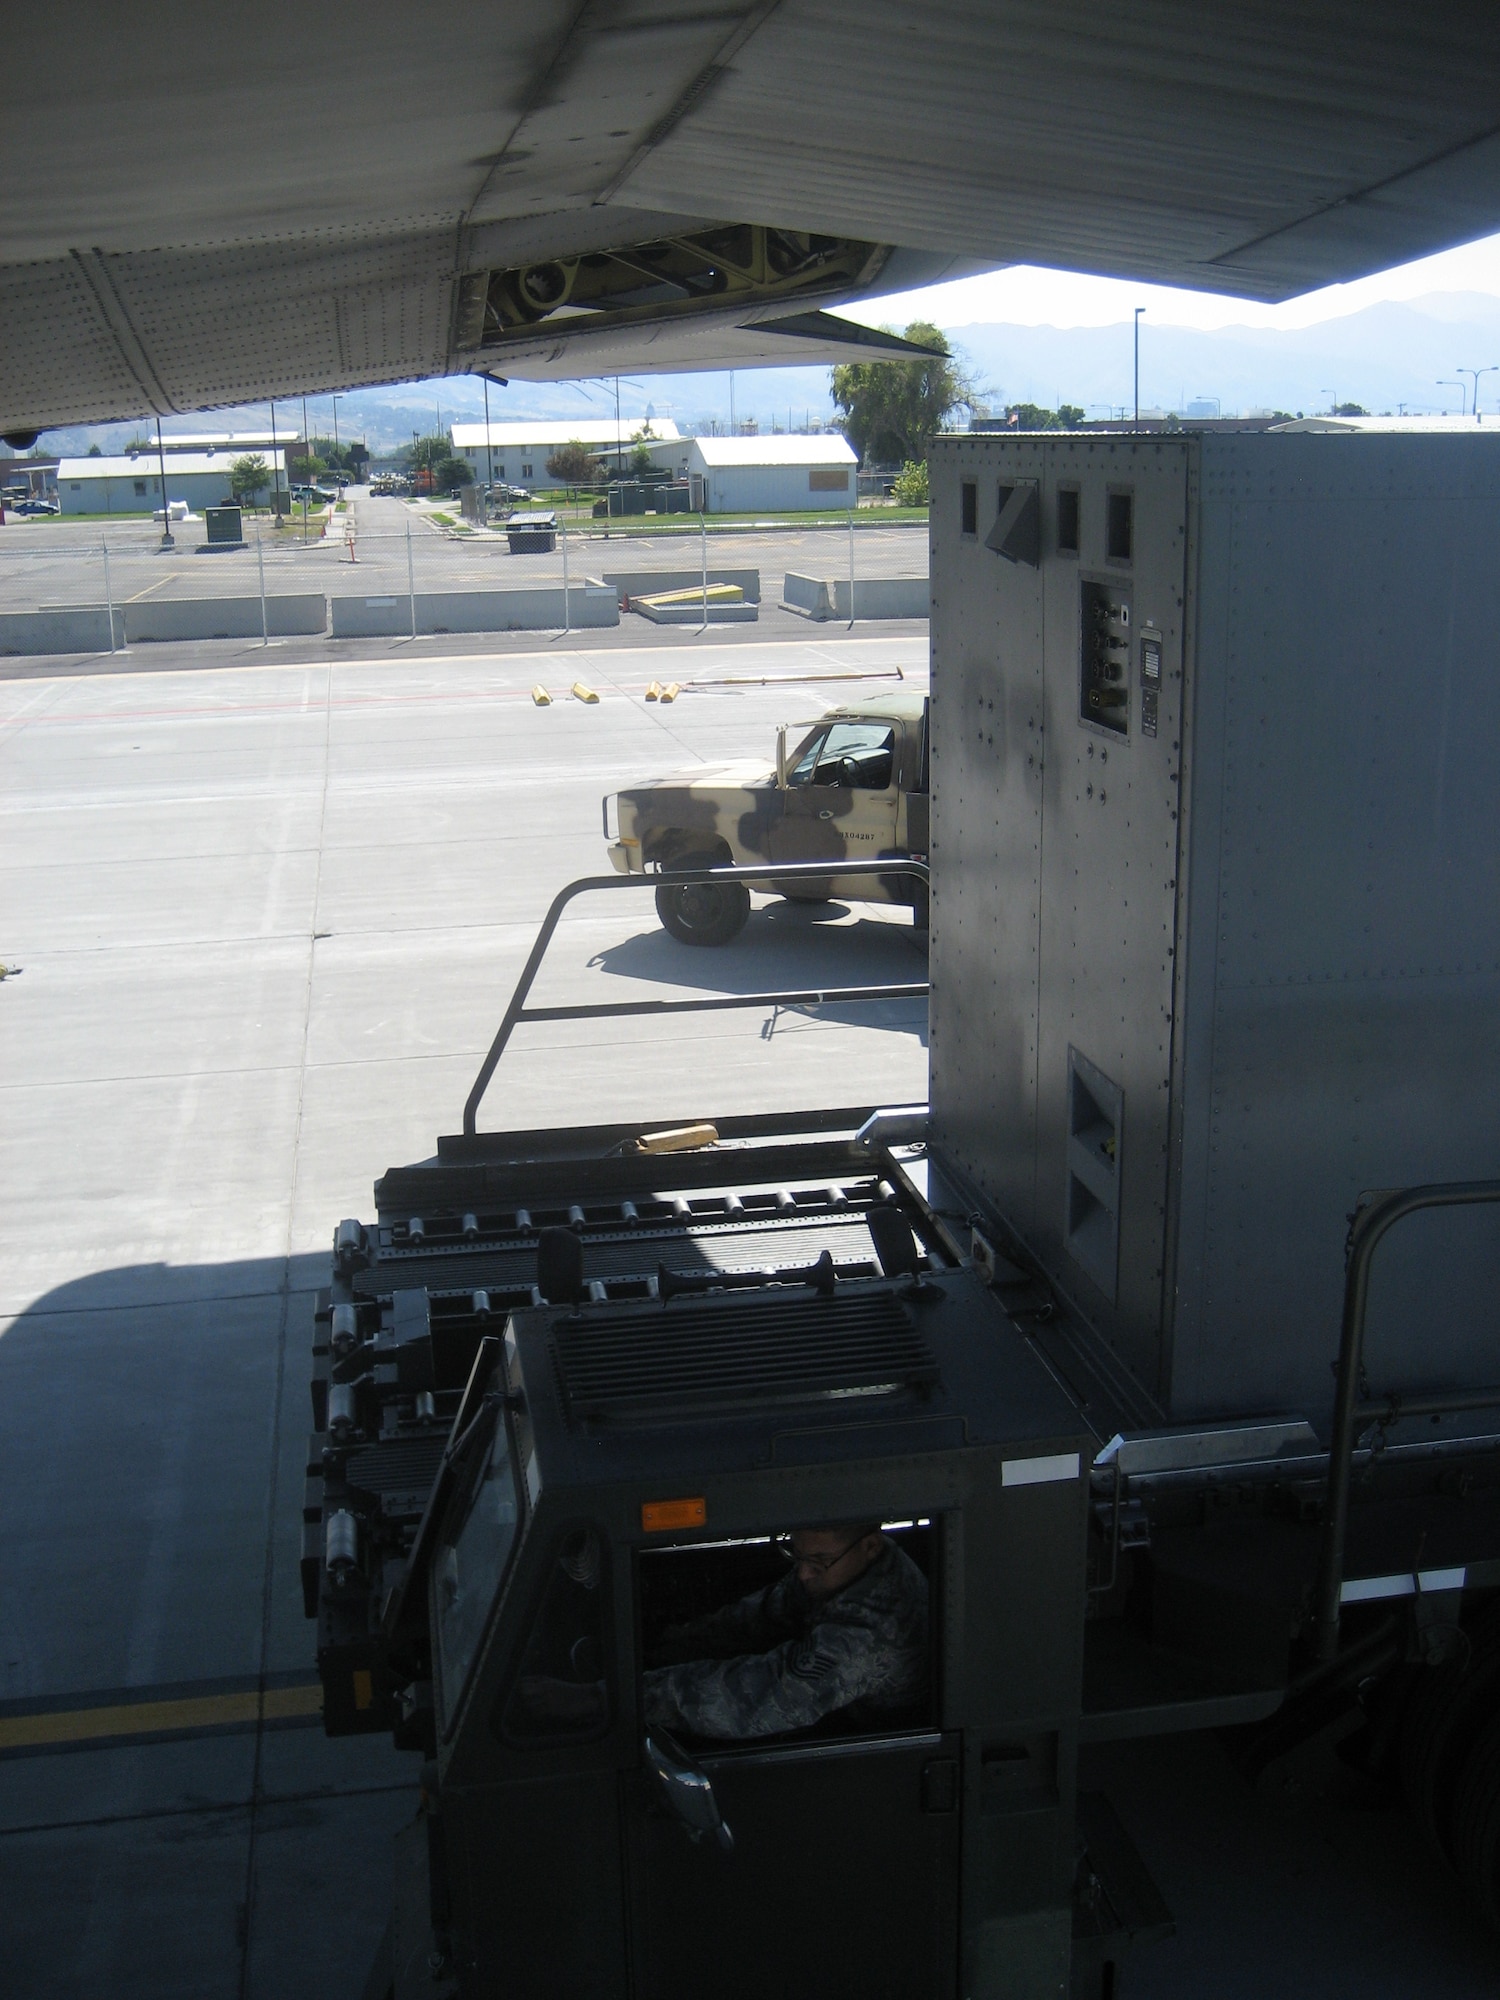 Senior Scout, a pallet-mounted communications and electronic intelligence system, is loaded onto a West Virginia Air National Guard C-130H3 Hercules aircraft, Aug. 17, 2009. The 130th Airlift Wing out of Charleston, W.Va. deployed to Salt Lake City, Utah for one month to participate in testing. The huge 4,500 cubic foot cargo area of the aircraft duplicates the volume of the standard American railroad box car. 
(U.S. Air Force photo by Master Sgt. Debbie Turrill/Released)